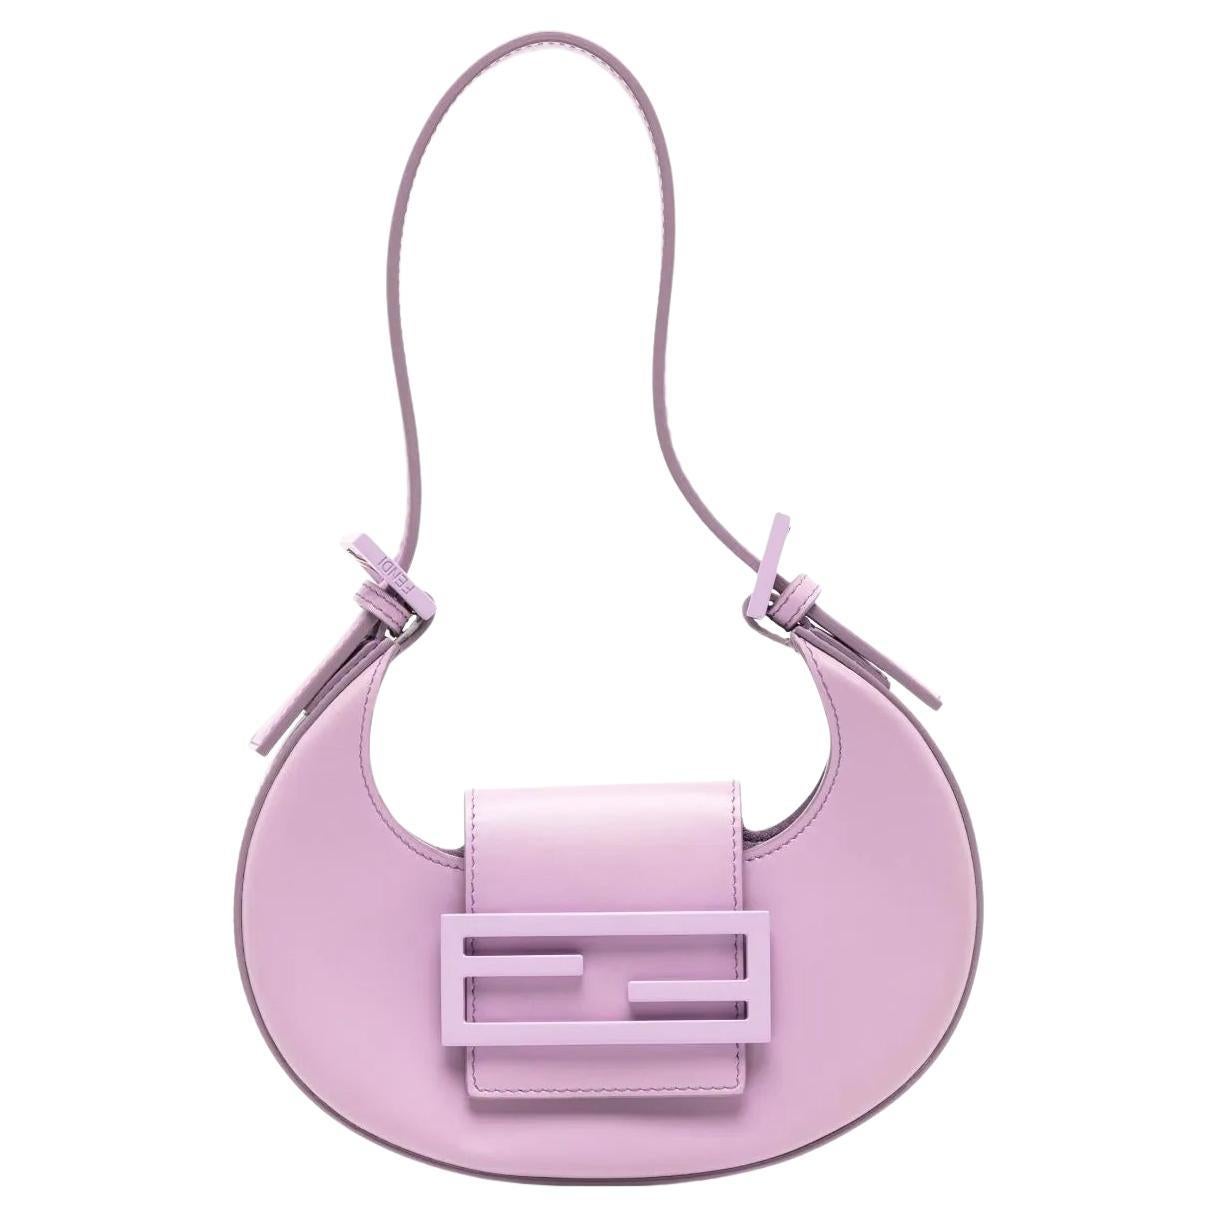 Rose Shocking Mini Lindy 20cm in Clemence Leather with Palladium Hardware,  2021, Handbags & Accessories, 2021